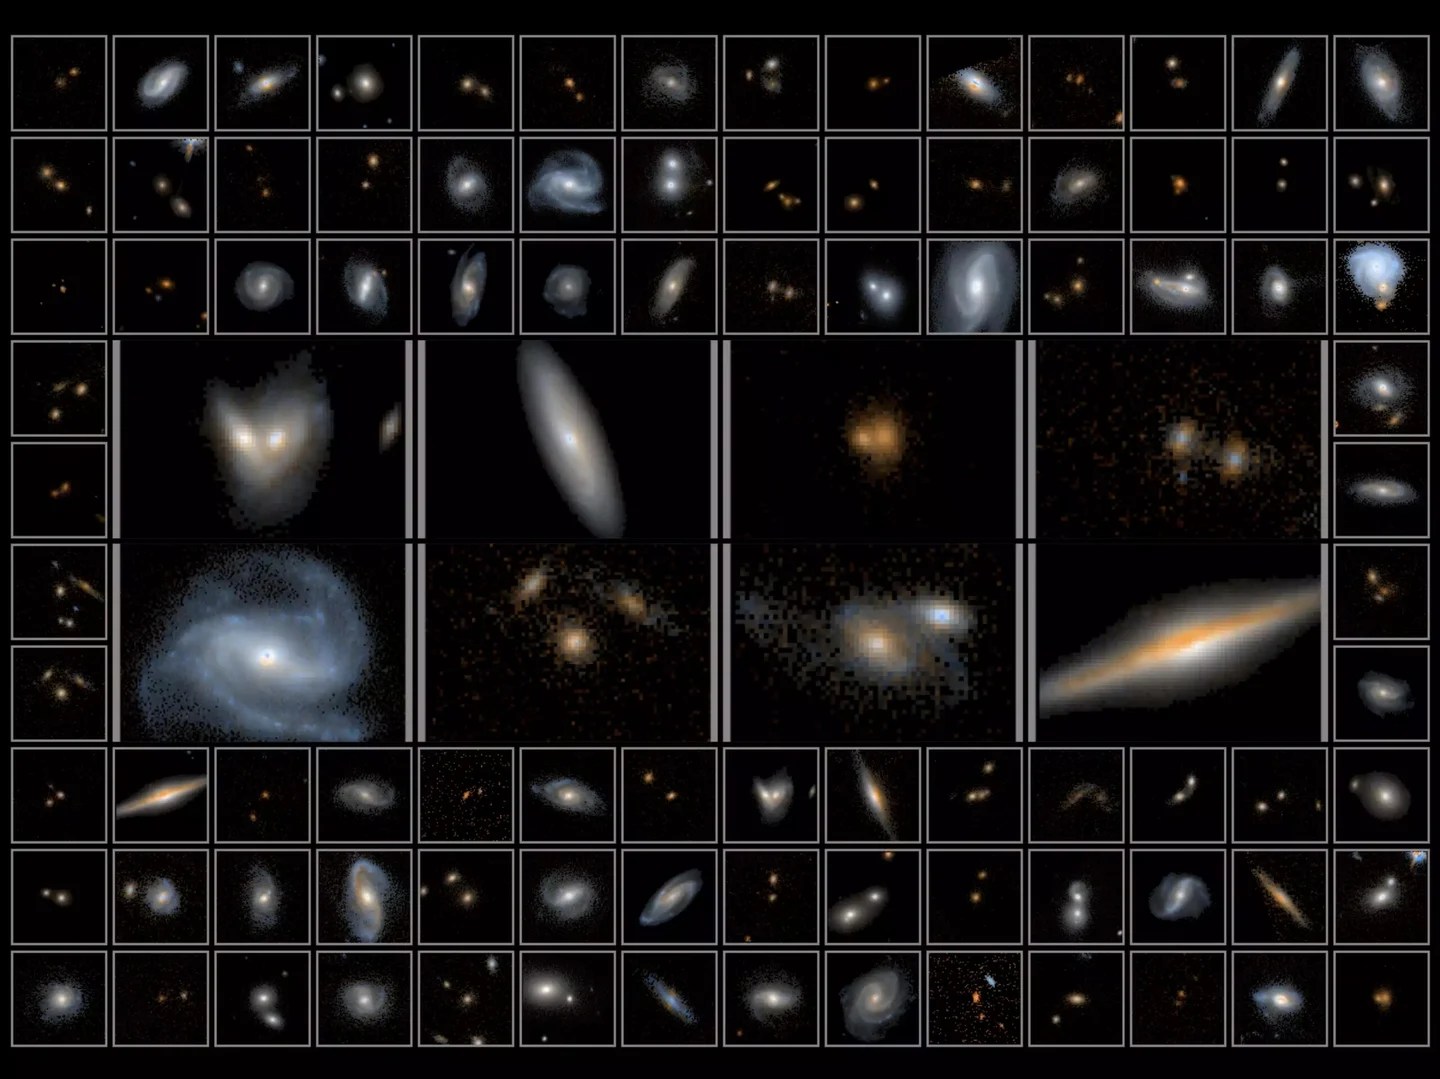 Hubble’s largest near-infrared image helps astronomers see 10 billion years into galaxies’ past